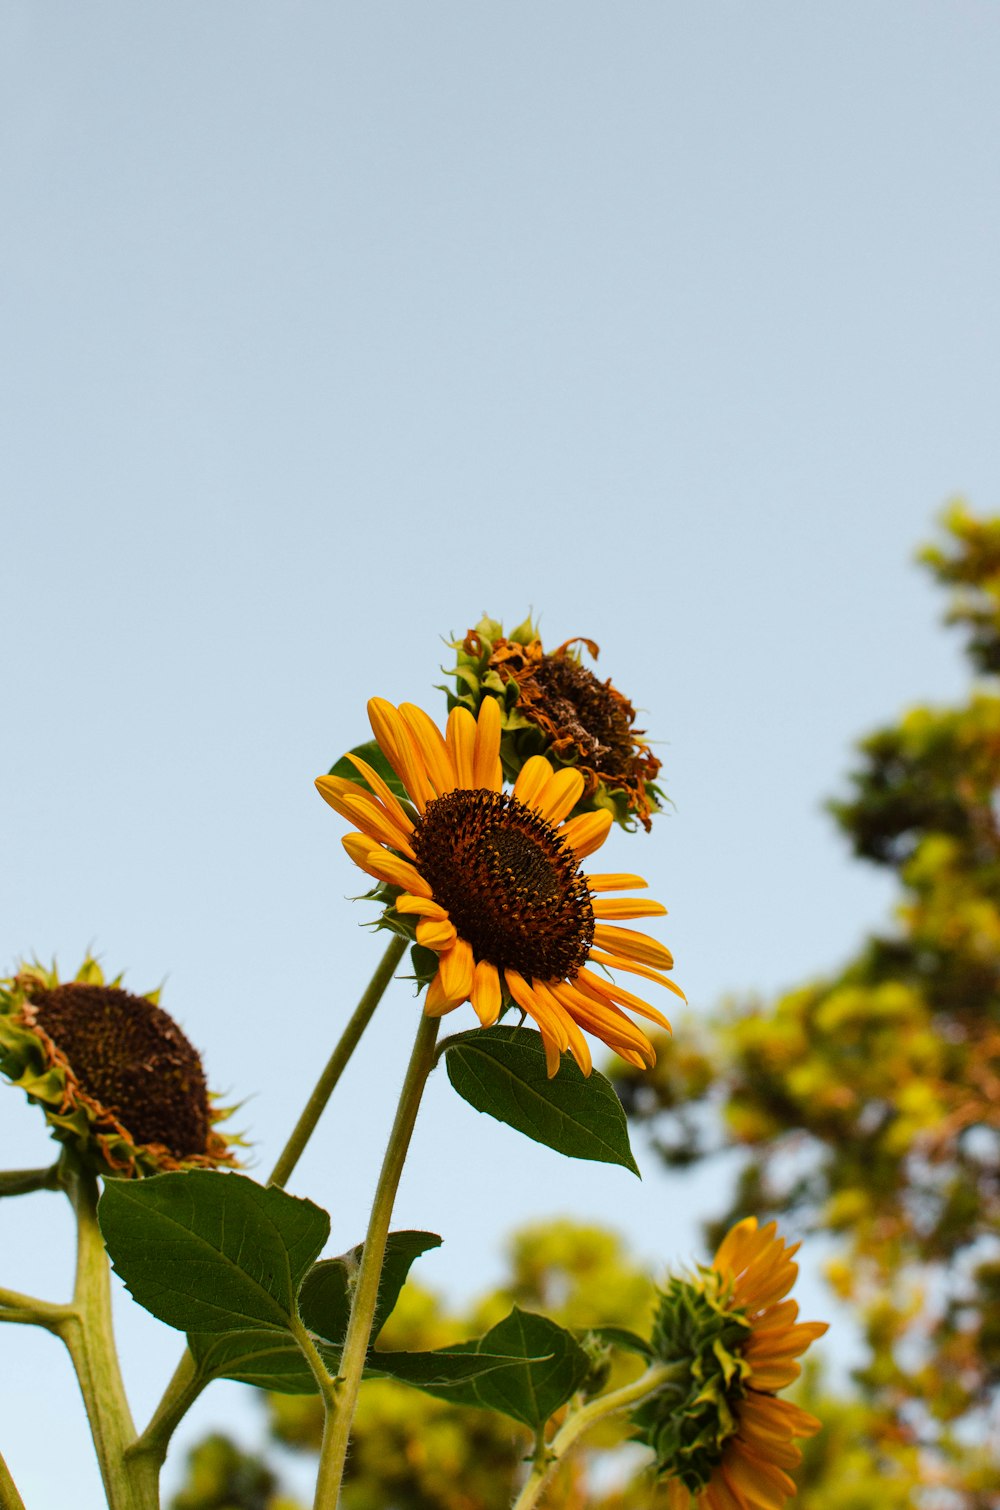 a large sunflower standing in front of a blue sky